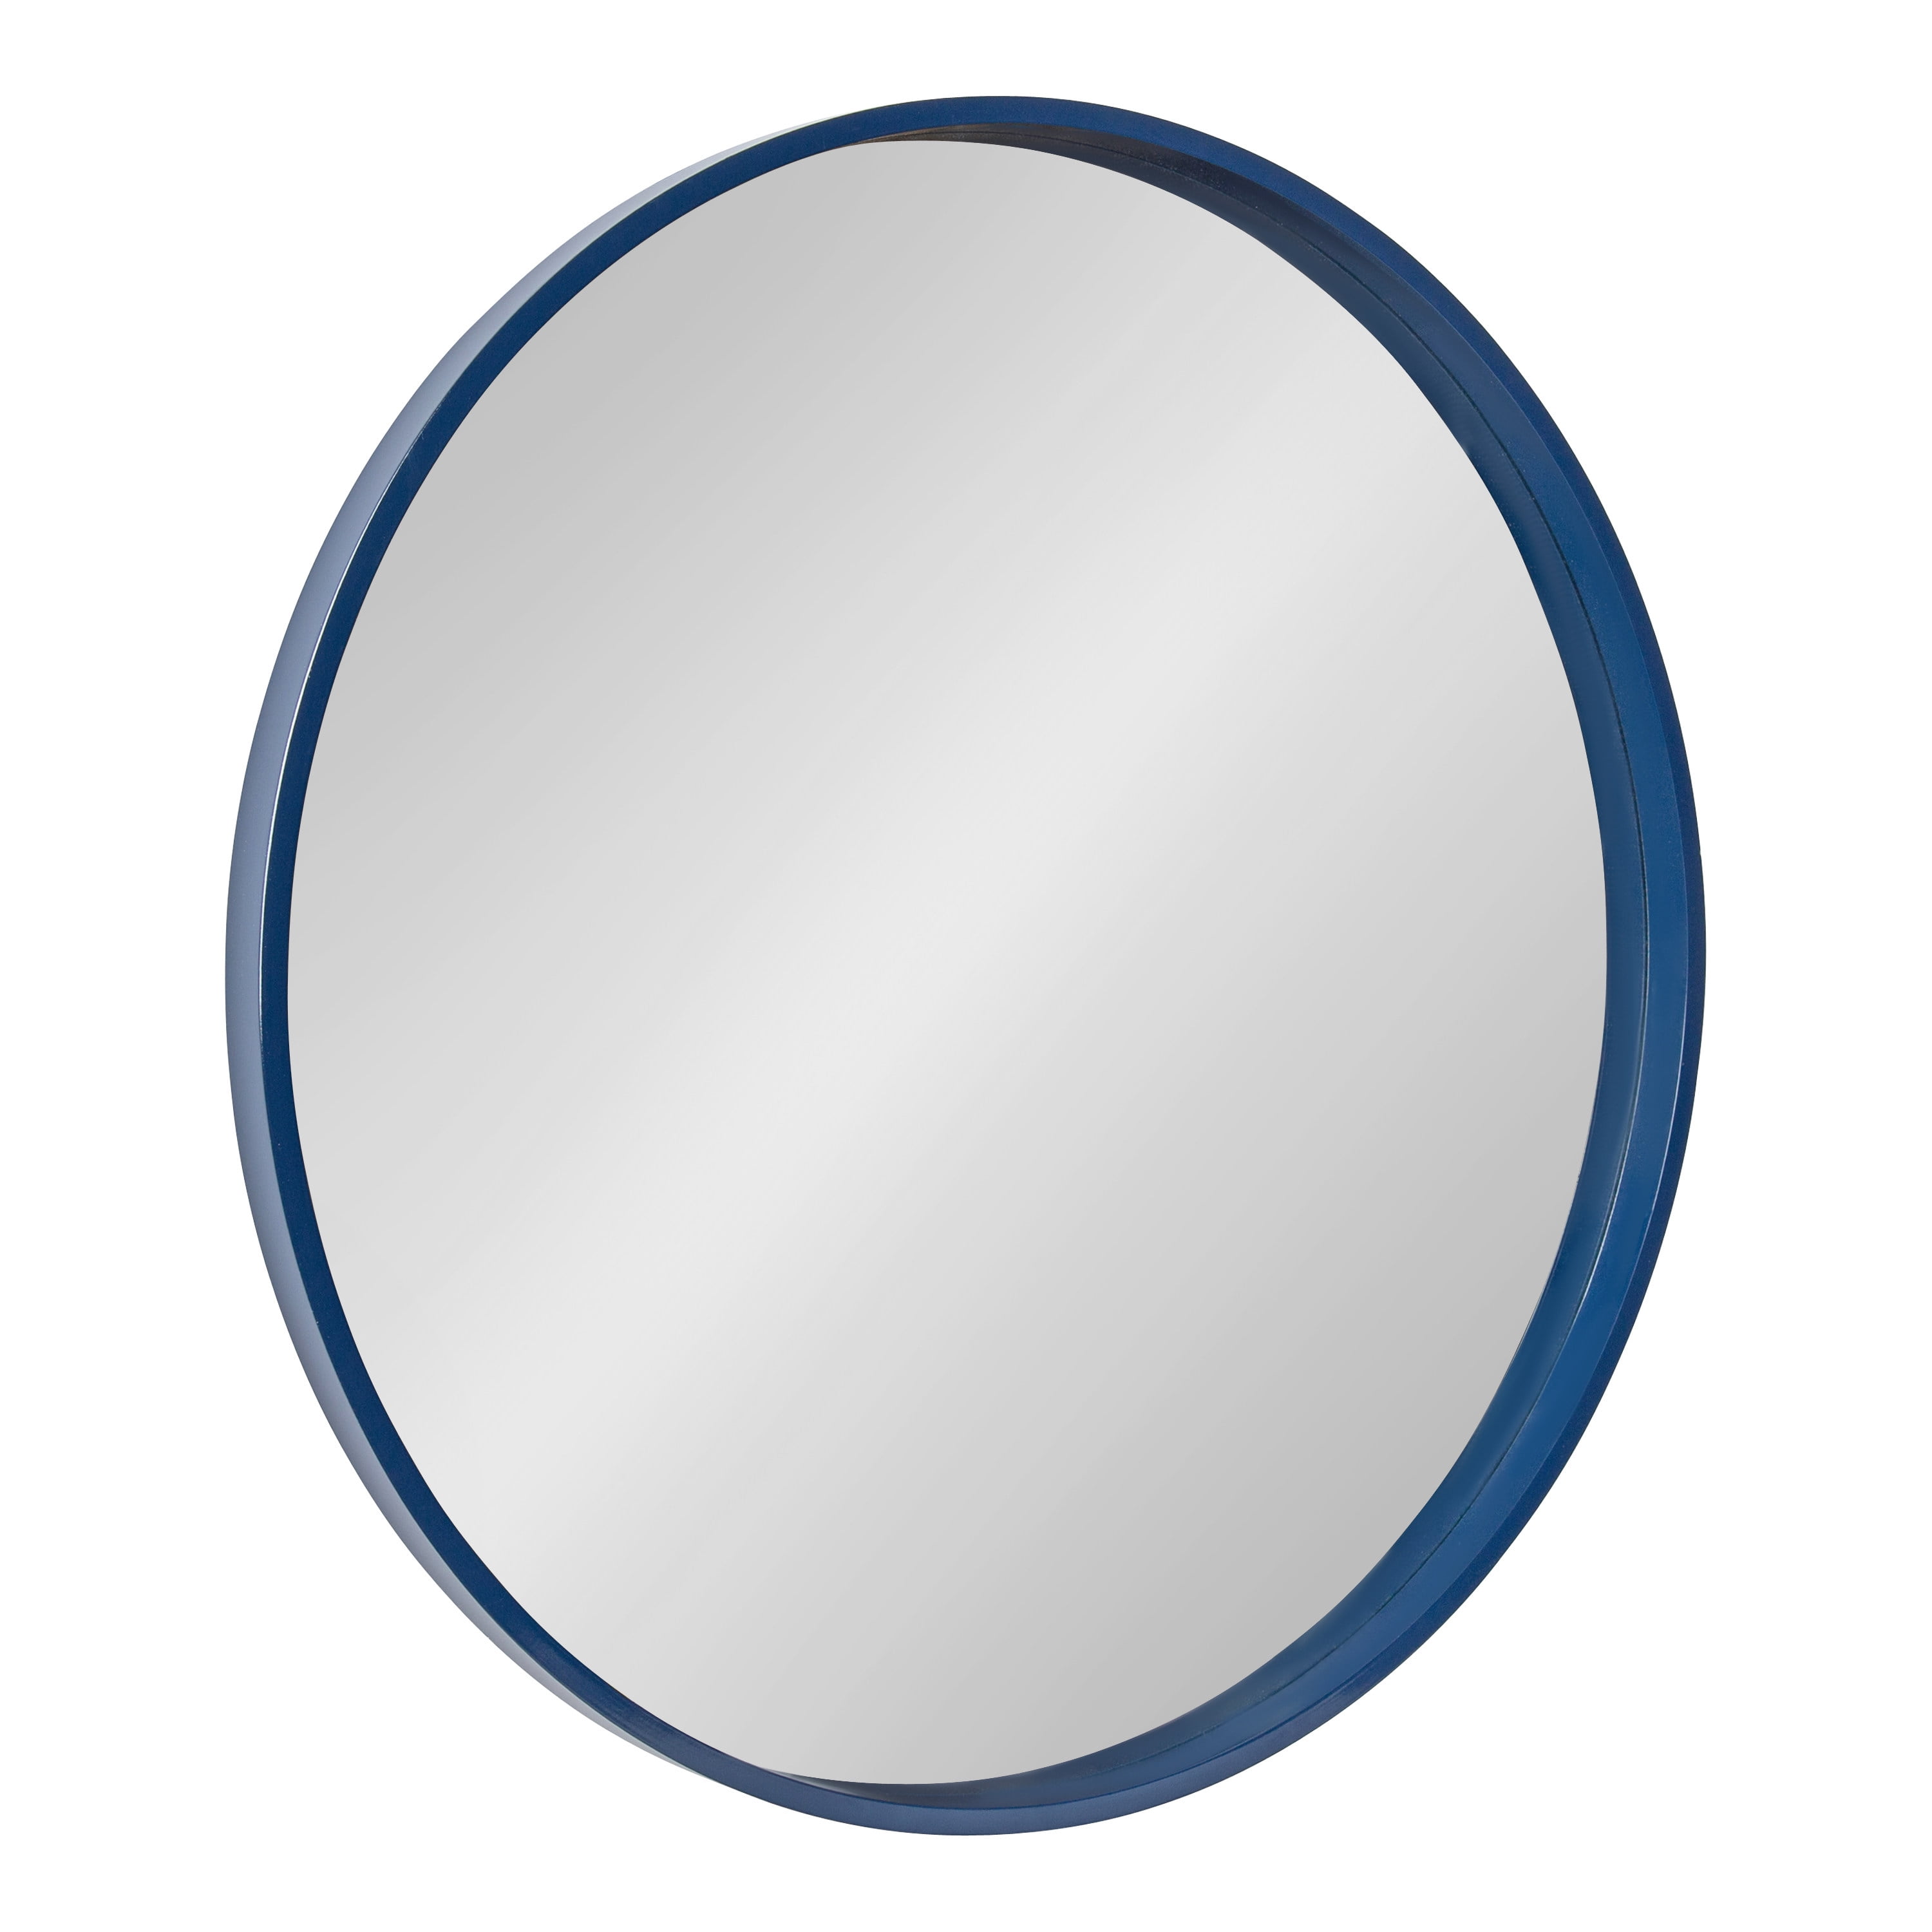 Kate and Laurel Travis Modern Round Wall Mirror, 31.5 inch Diameter, Navy  Blue, Transitional Decorative Mirror for Wall